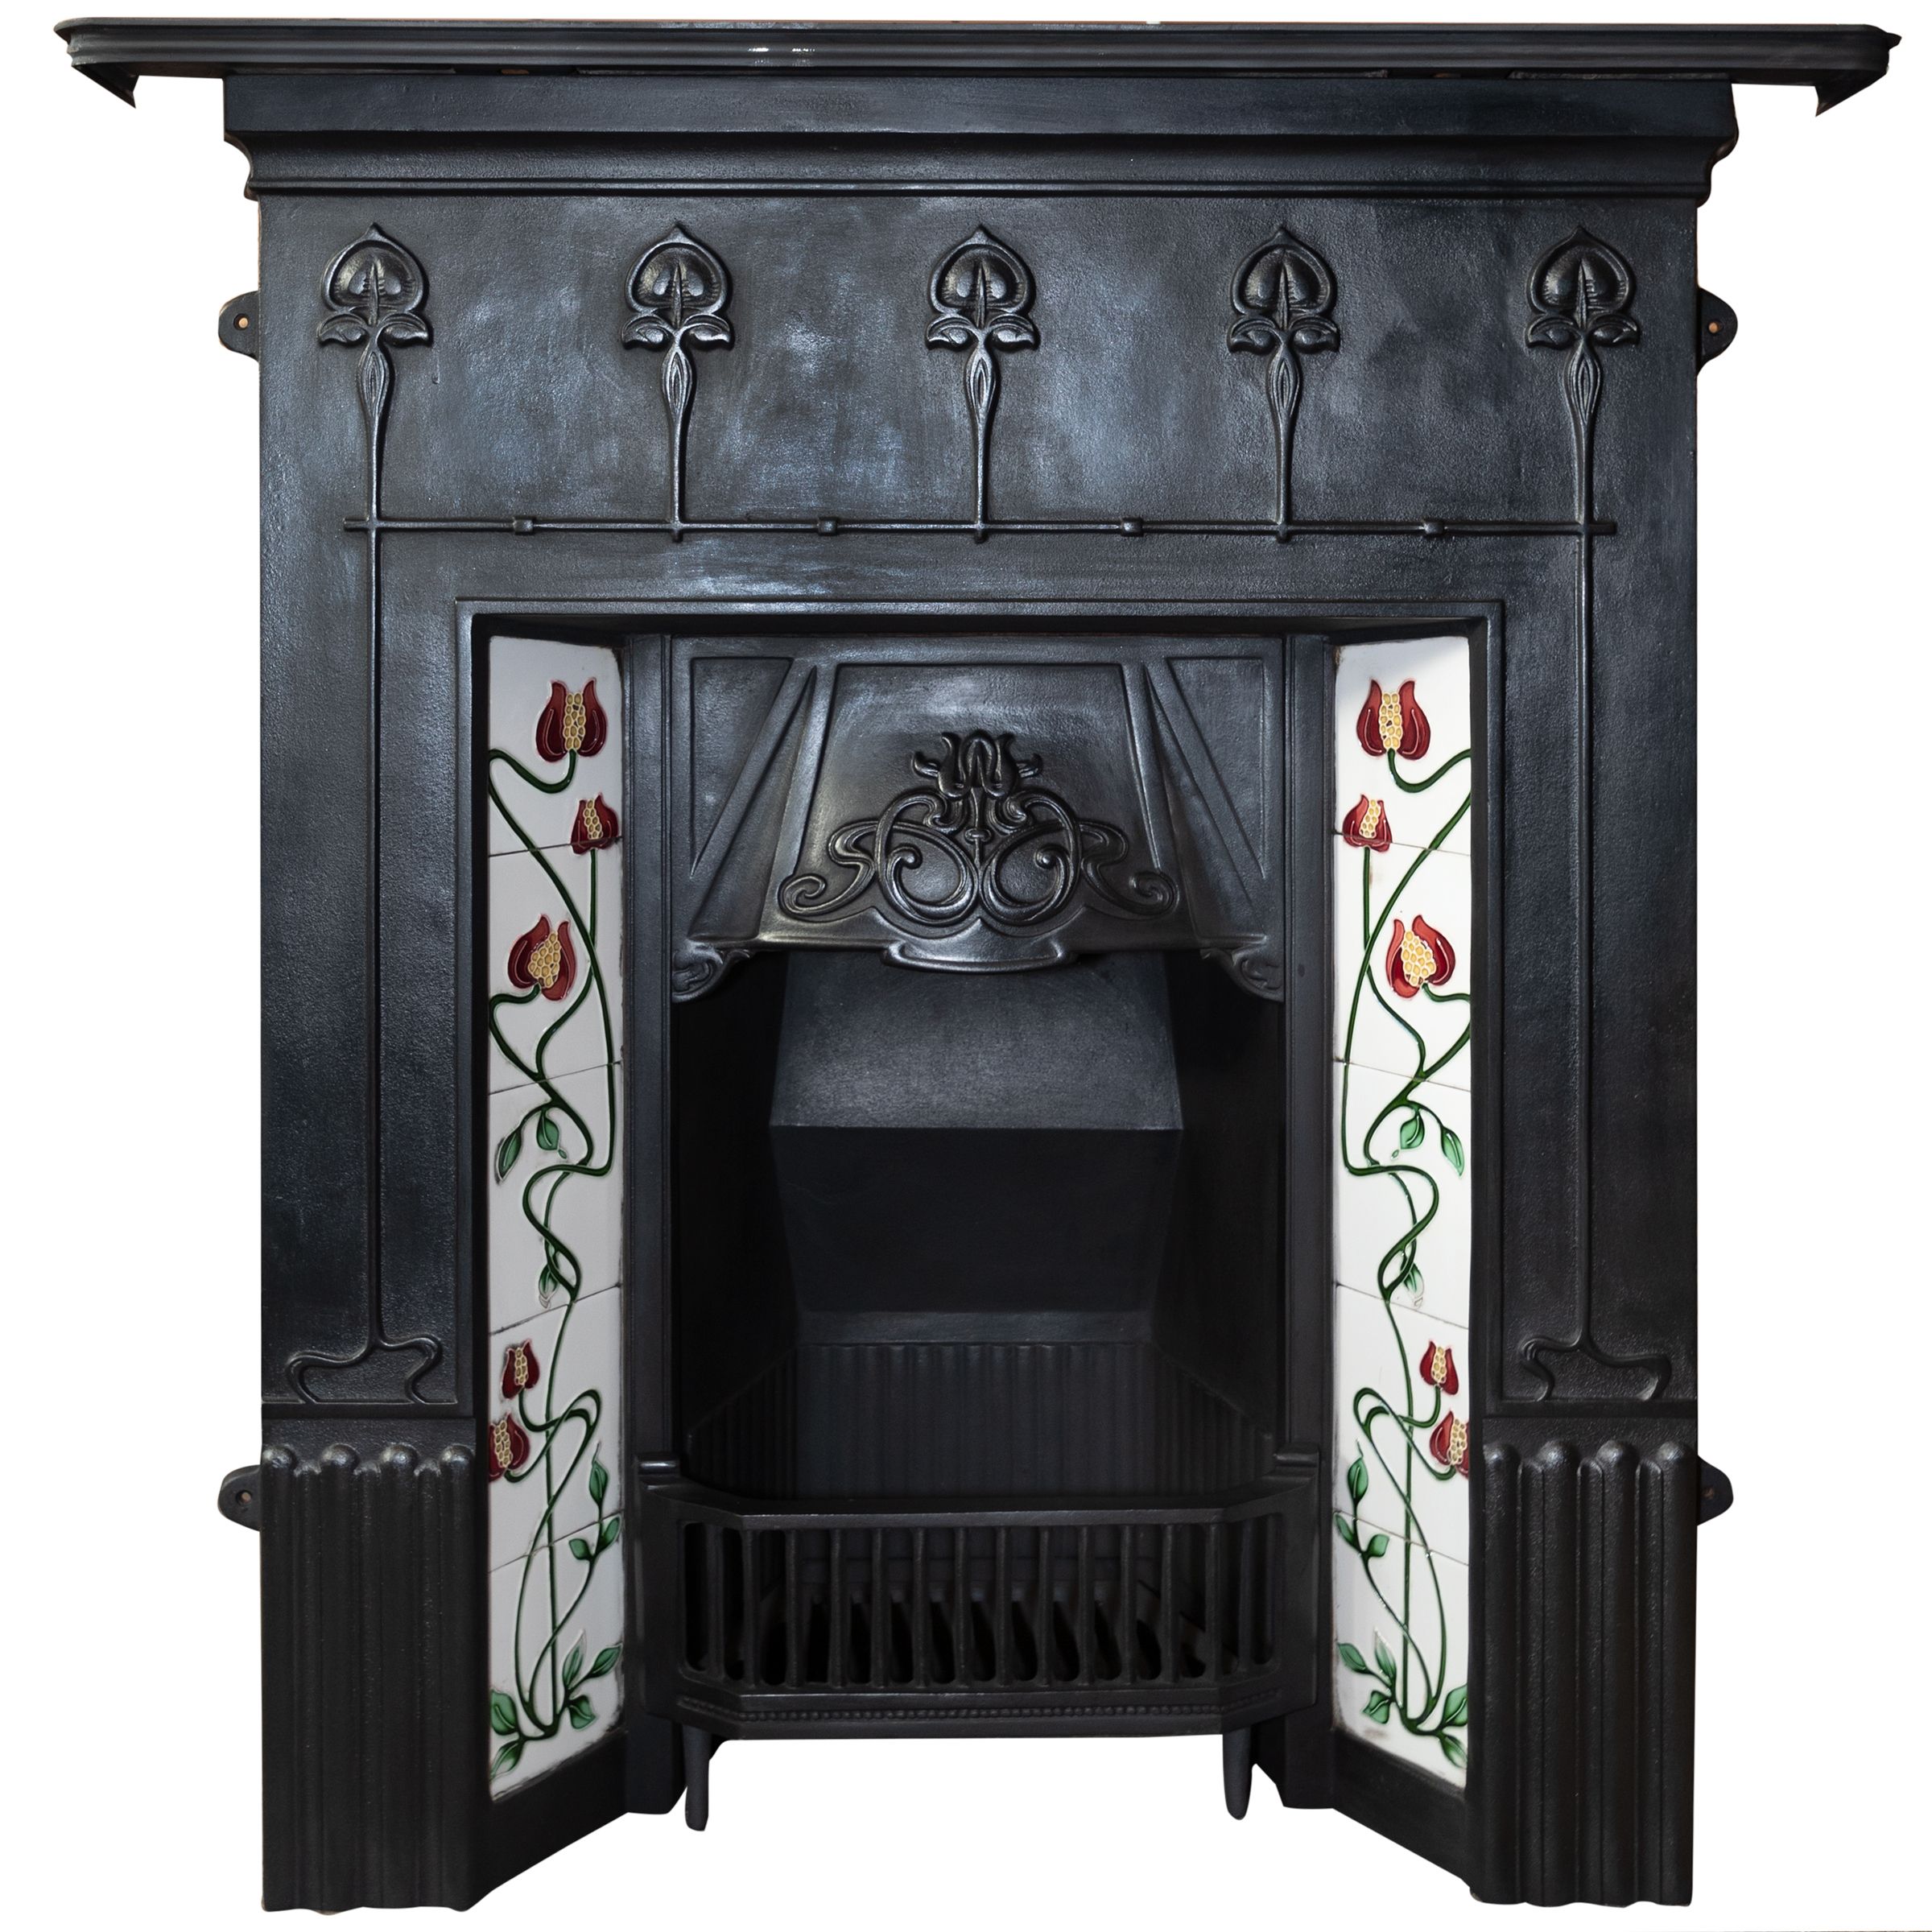 Ebay Fireplace Mantels Awesome Huge Selection Of Antique Cast Iron Fireplaces Fully